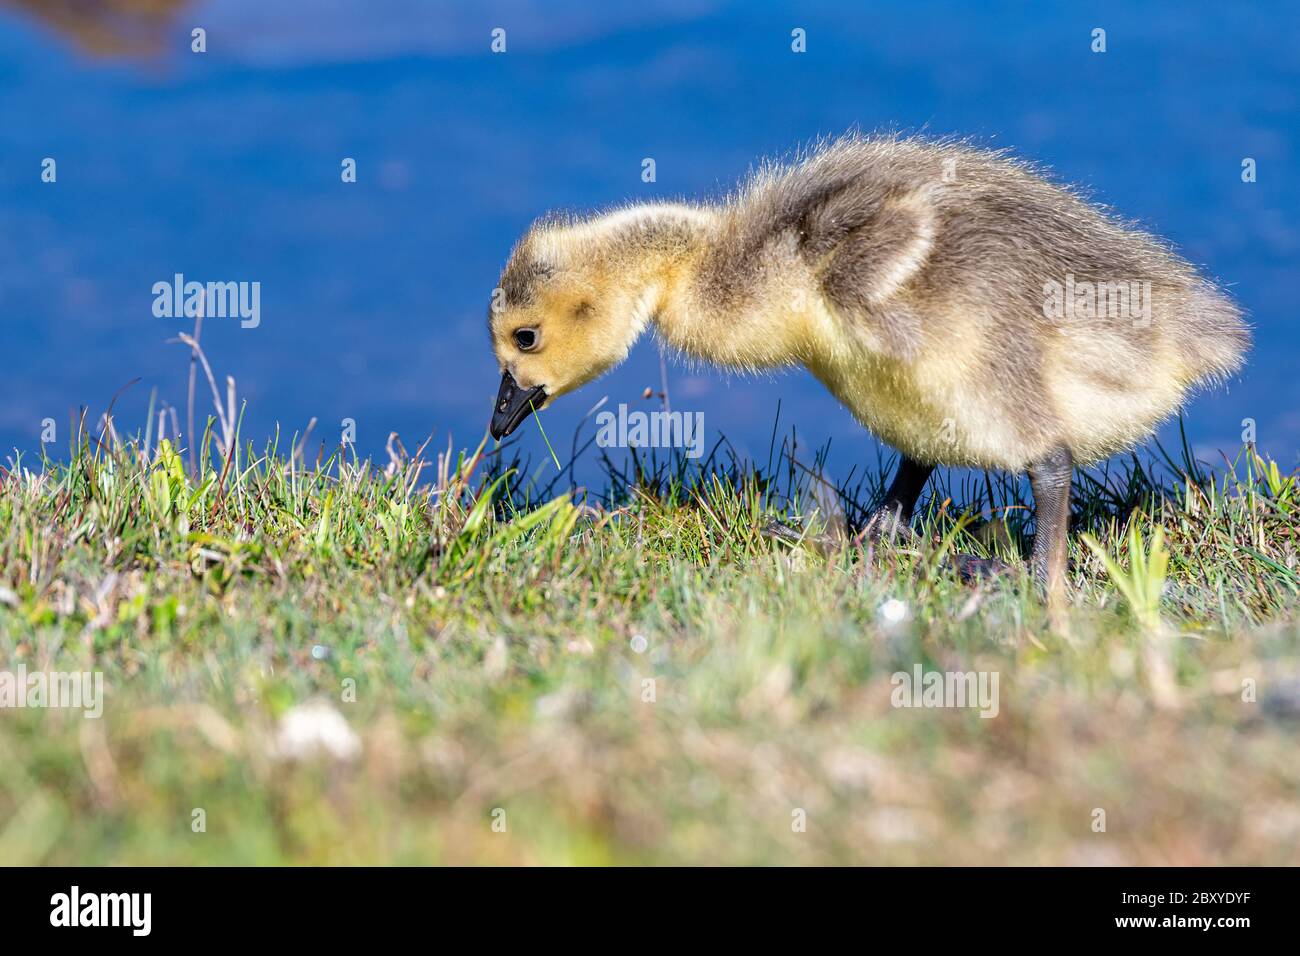 Baby Canada goose walking in short grass. He is looking down at the ground. Blue water in the background. Stock Photo